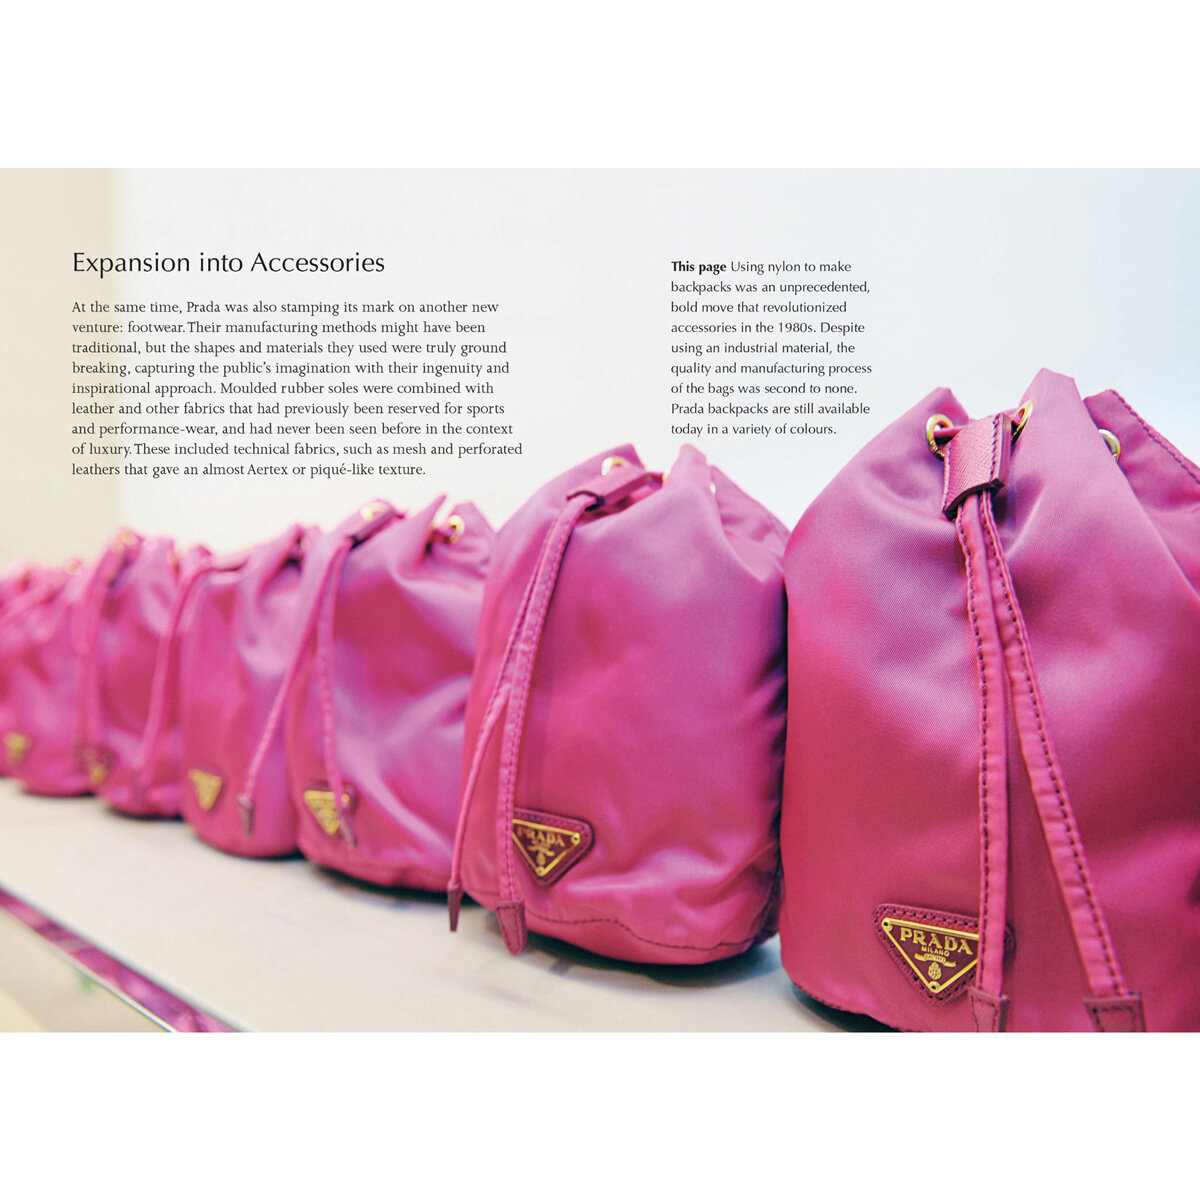 Accents  Little Guides To Style Fashion Icons Books Vuitton